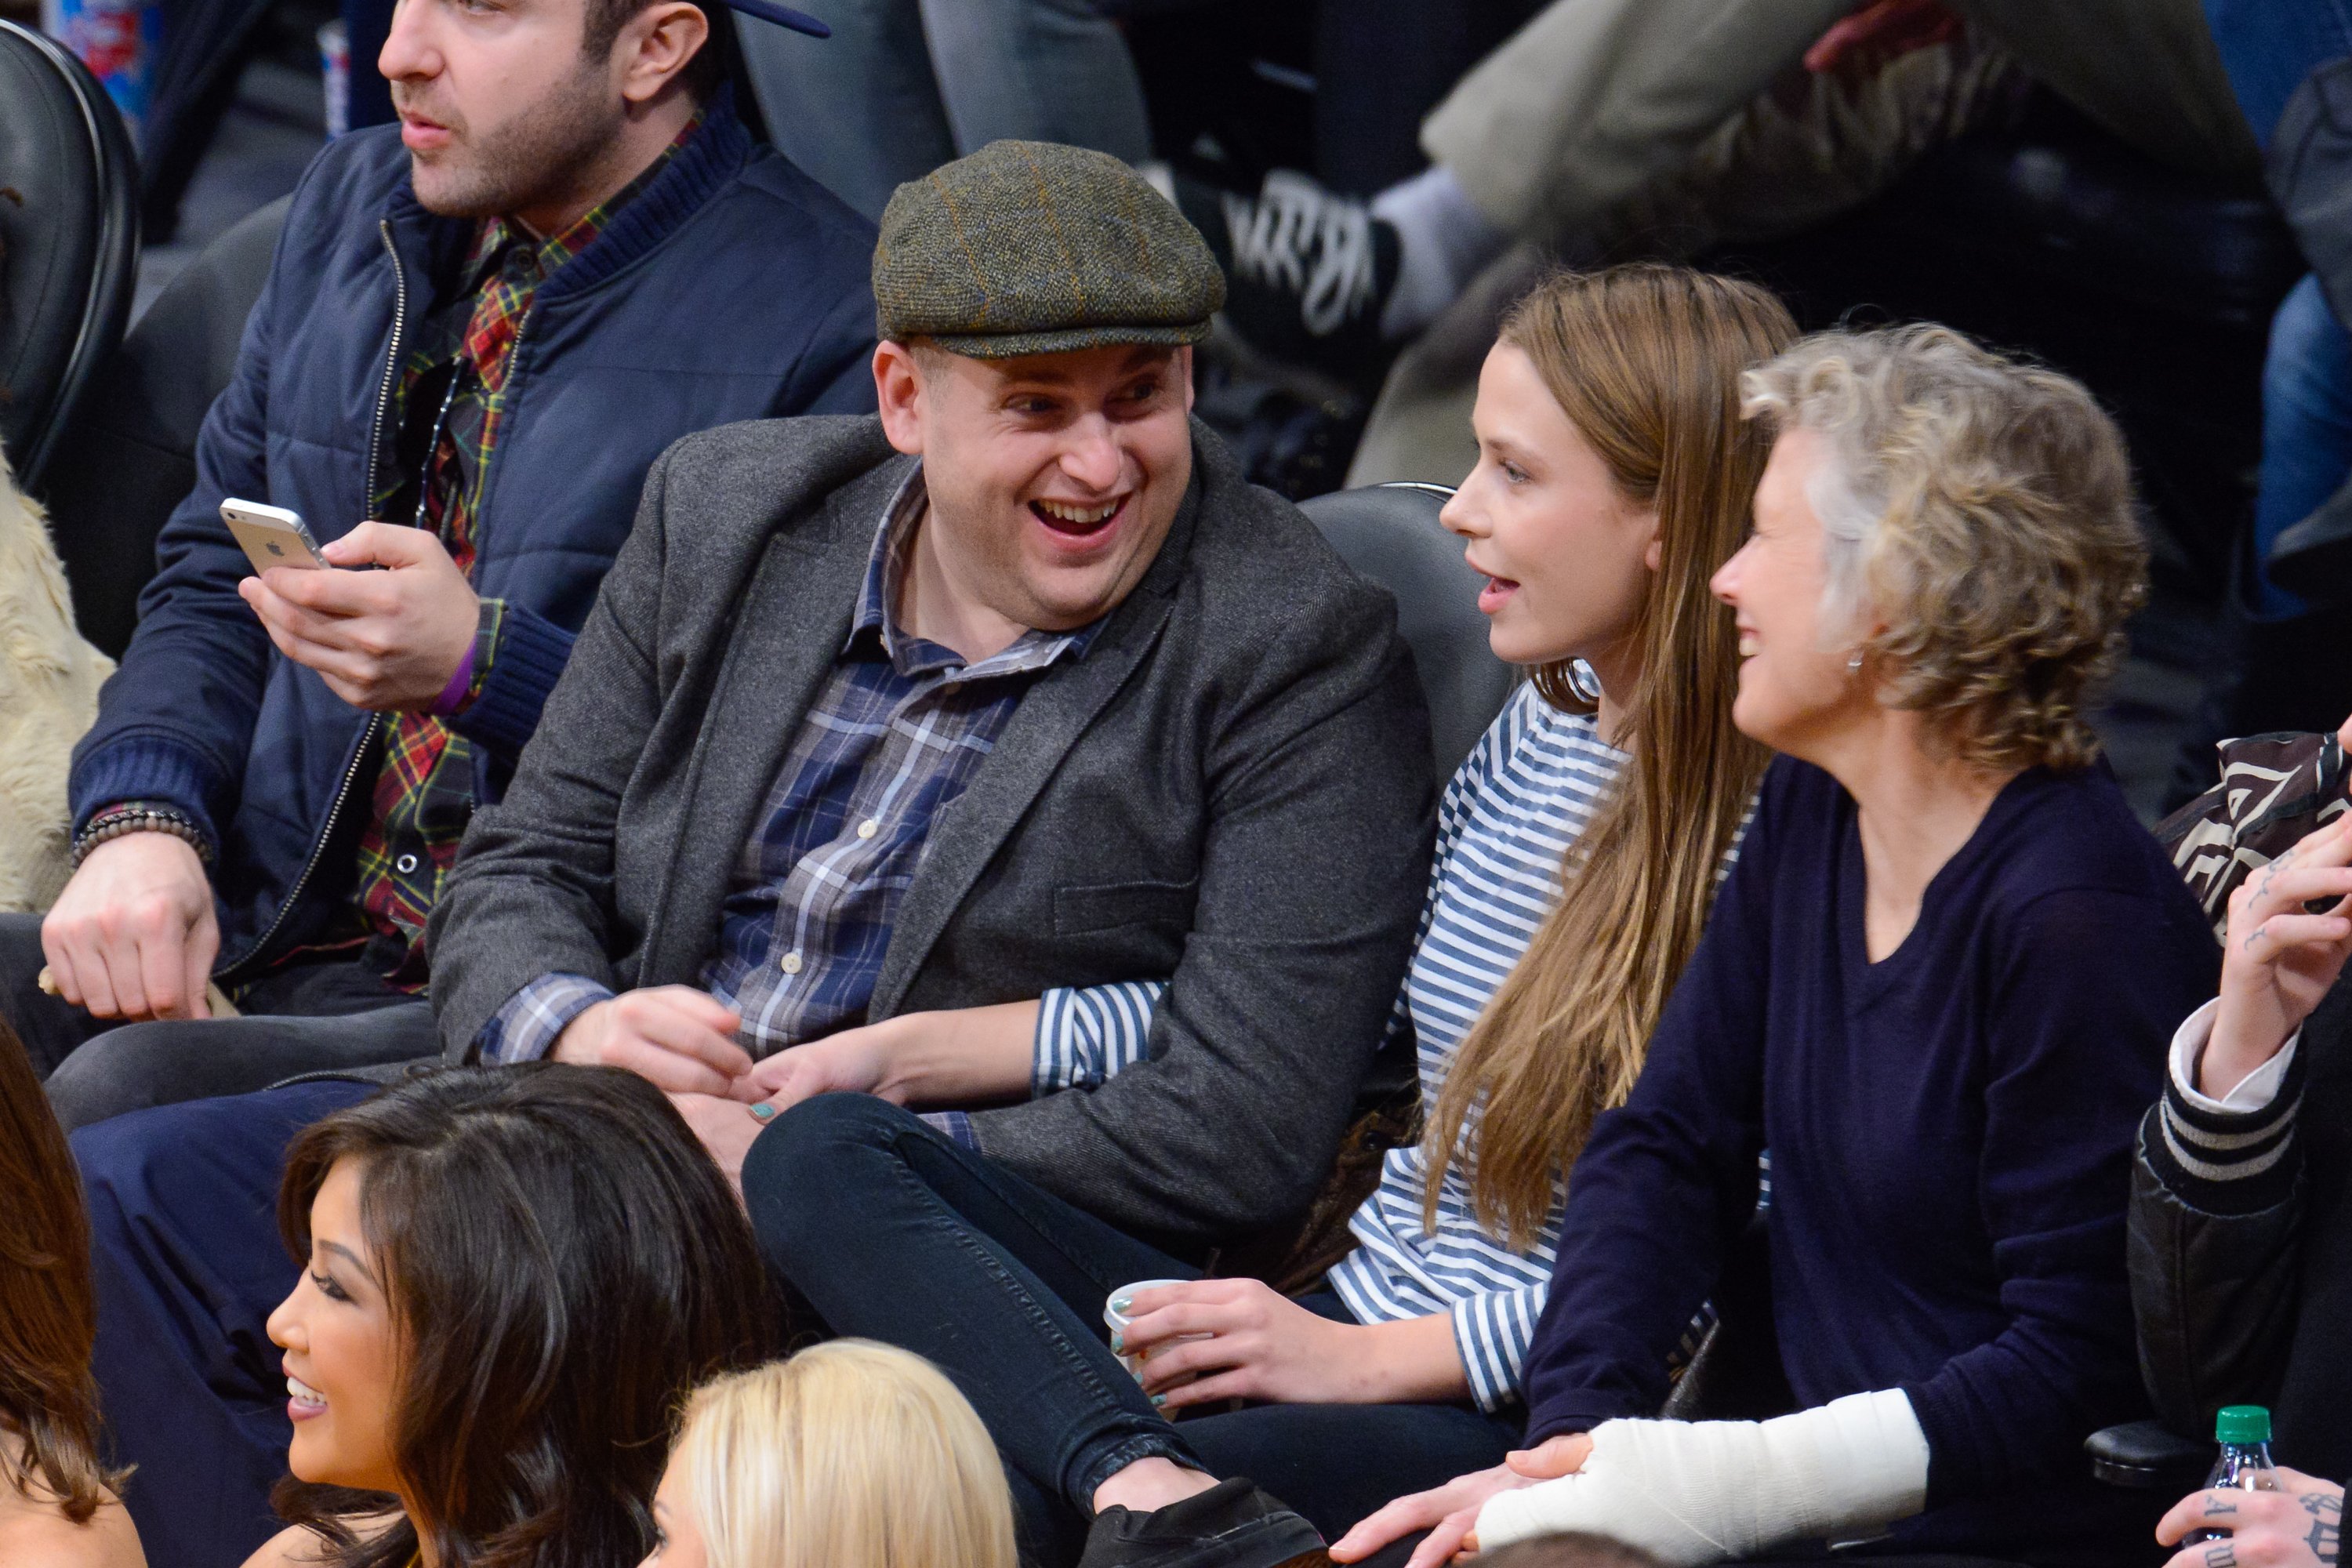 Jonah Hill and Isabelle McNally at a Chicago Bulls and Los Angeles Lakers game at Staples Center in Los Angeles, California, on February 9, 2014. | Source: Getty Images